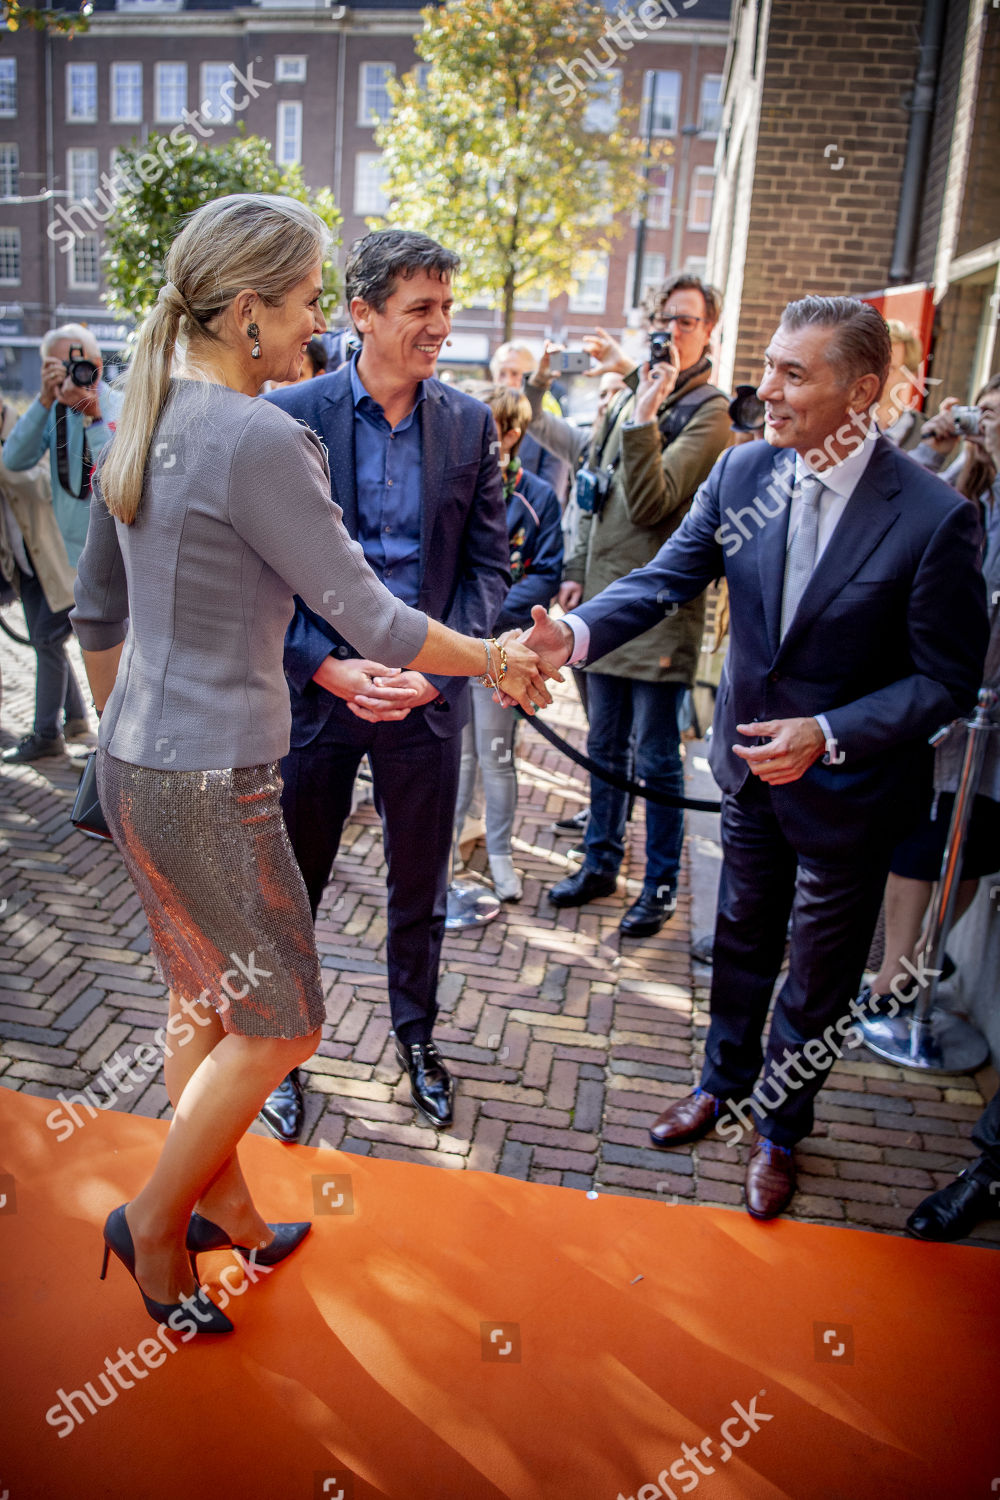 queen-maxima-arrives-at-the-annual-congress-of-mkb-netherlands-the-hague-the-netherlands-shutterstock-editorial-9919554a.jpg